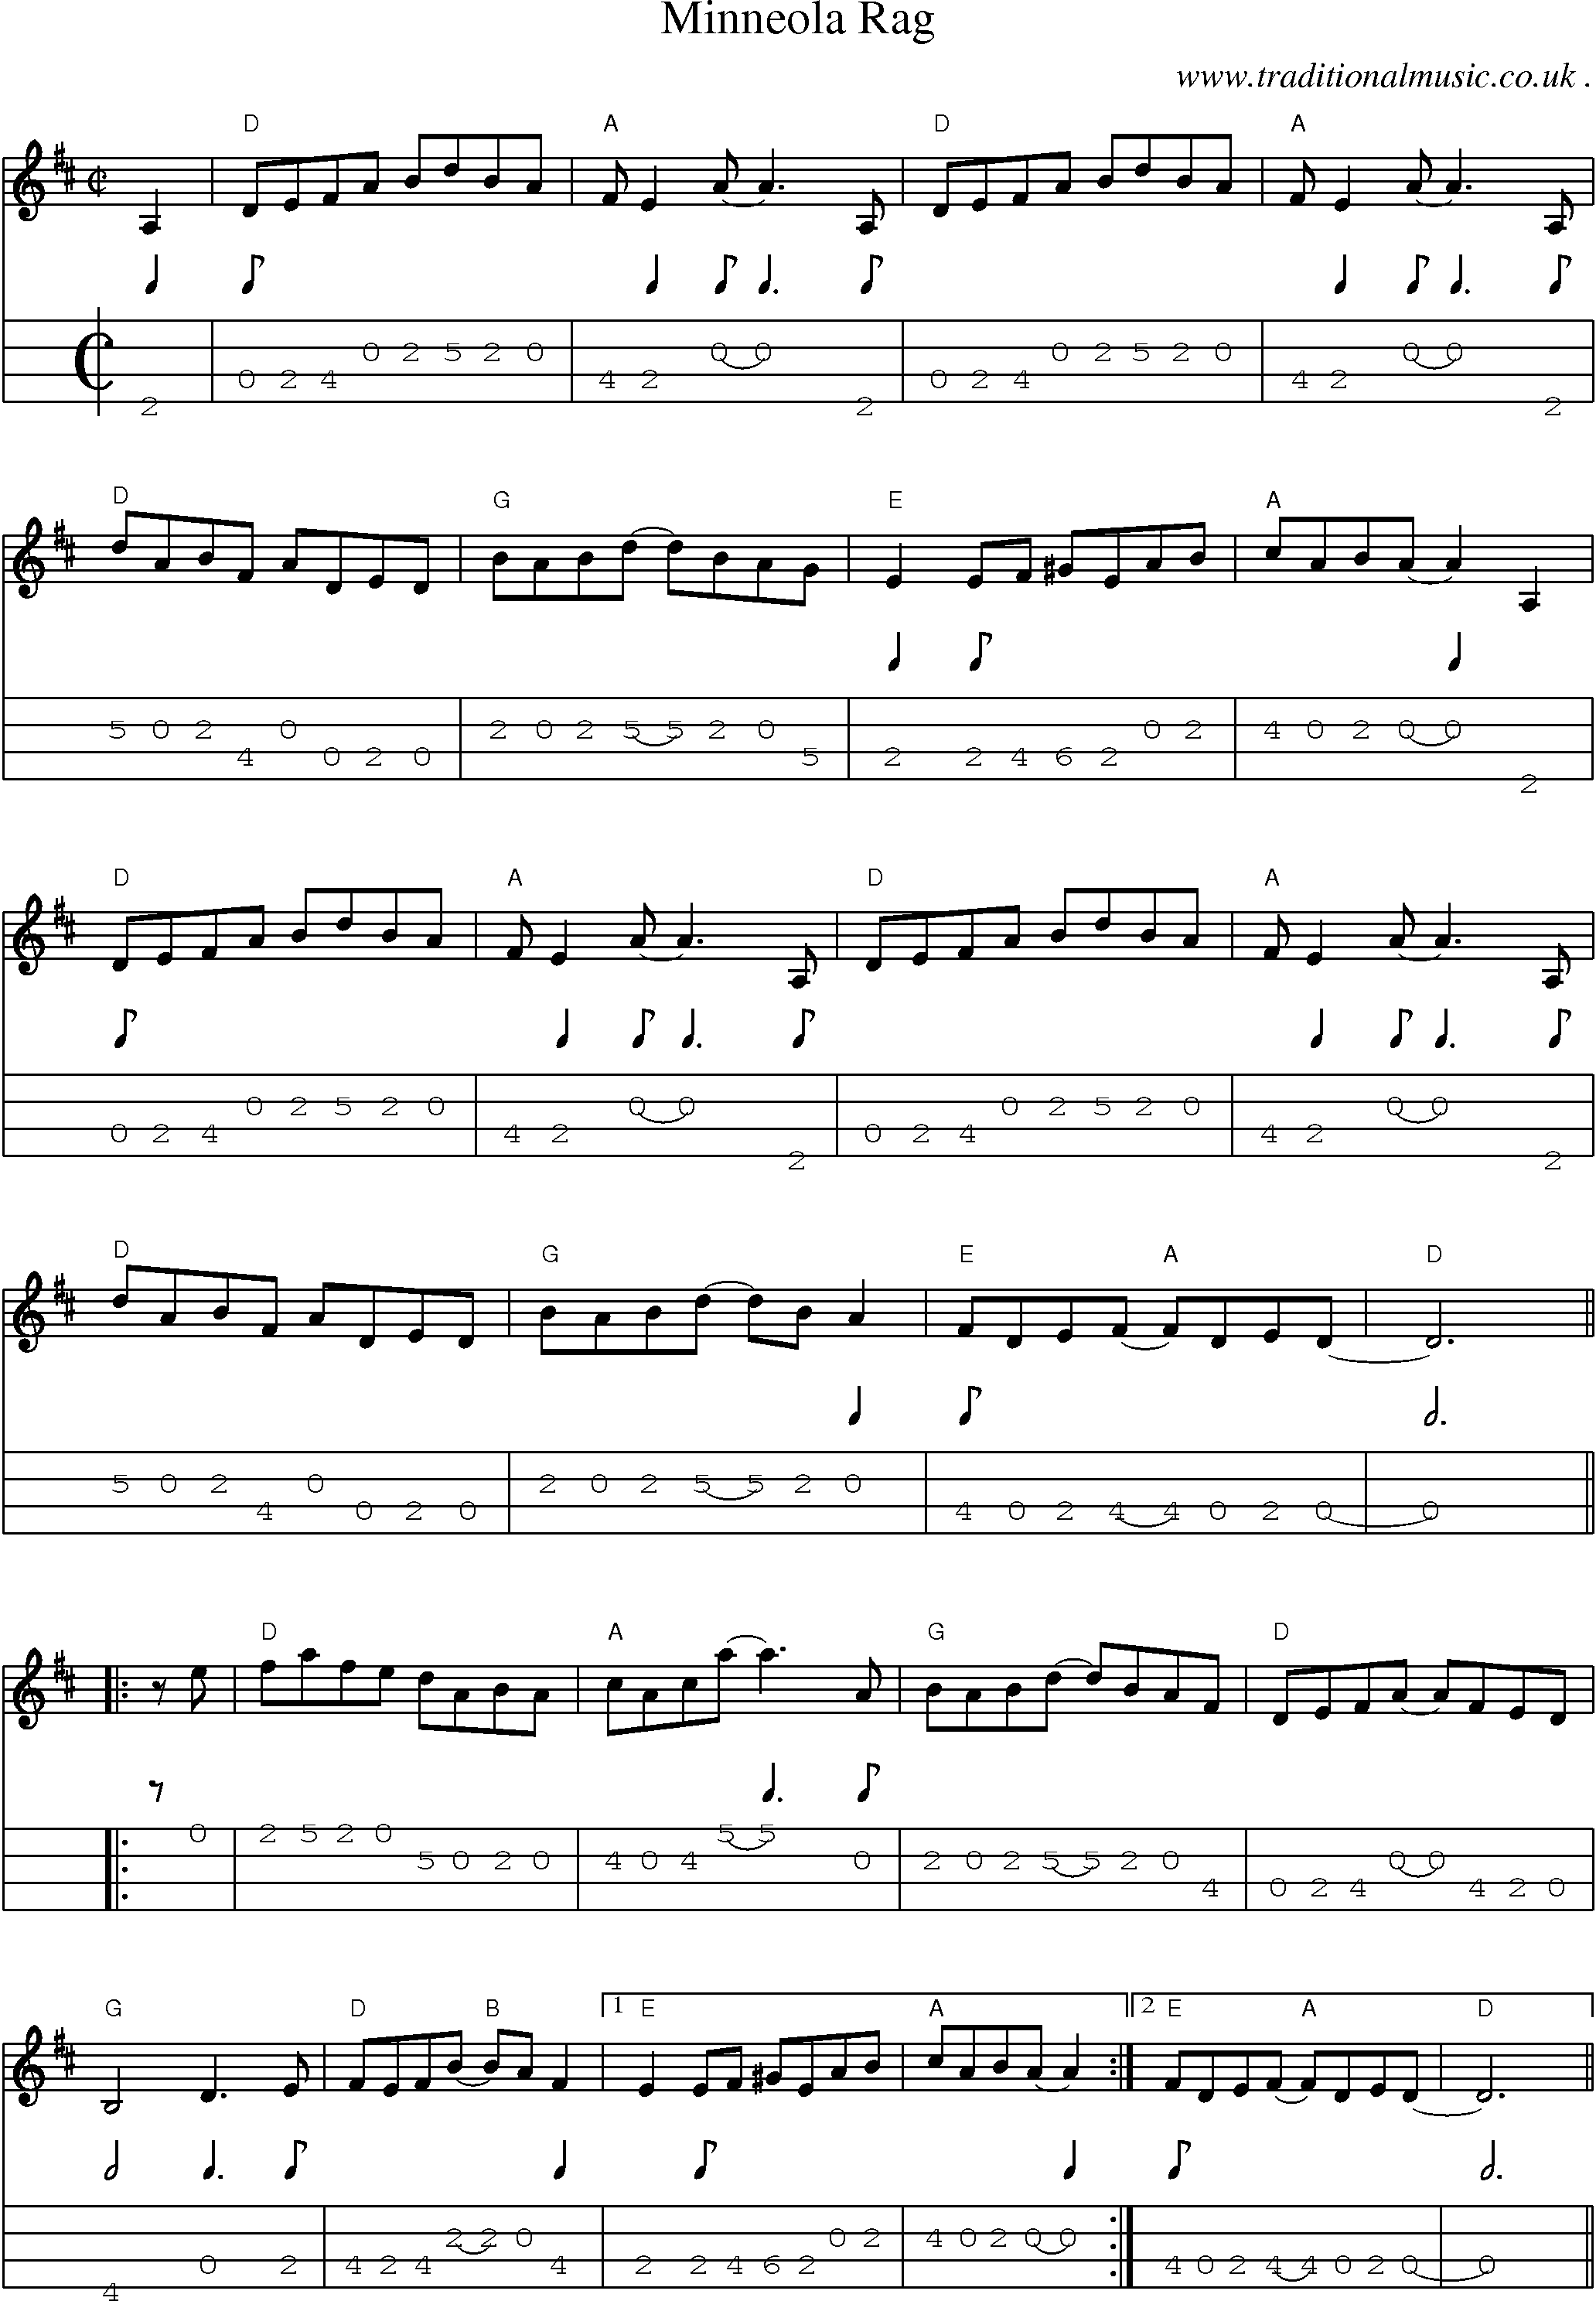 Music Score and Guitar Tabs for Minneola Rag